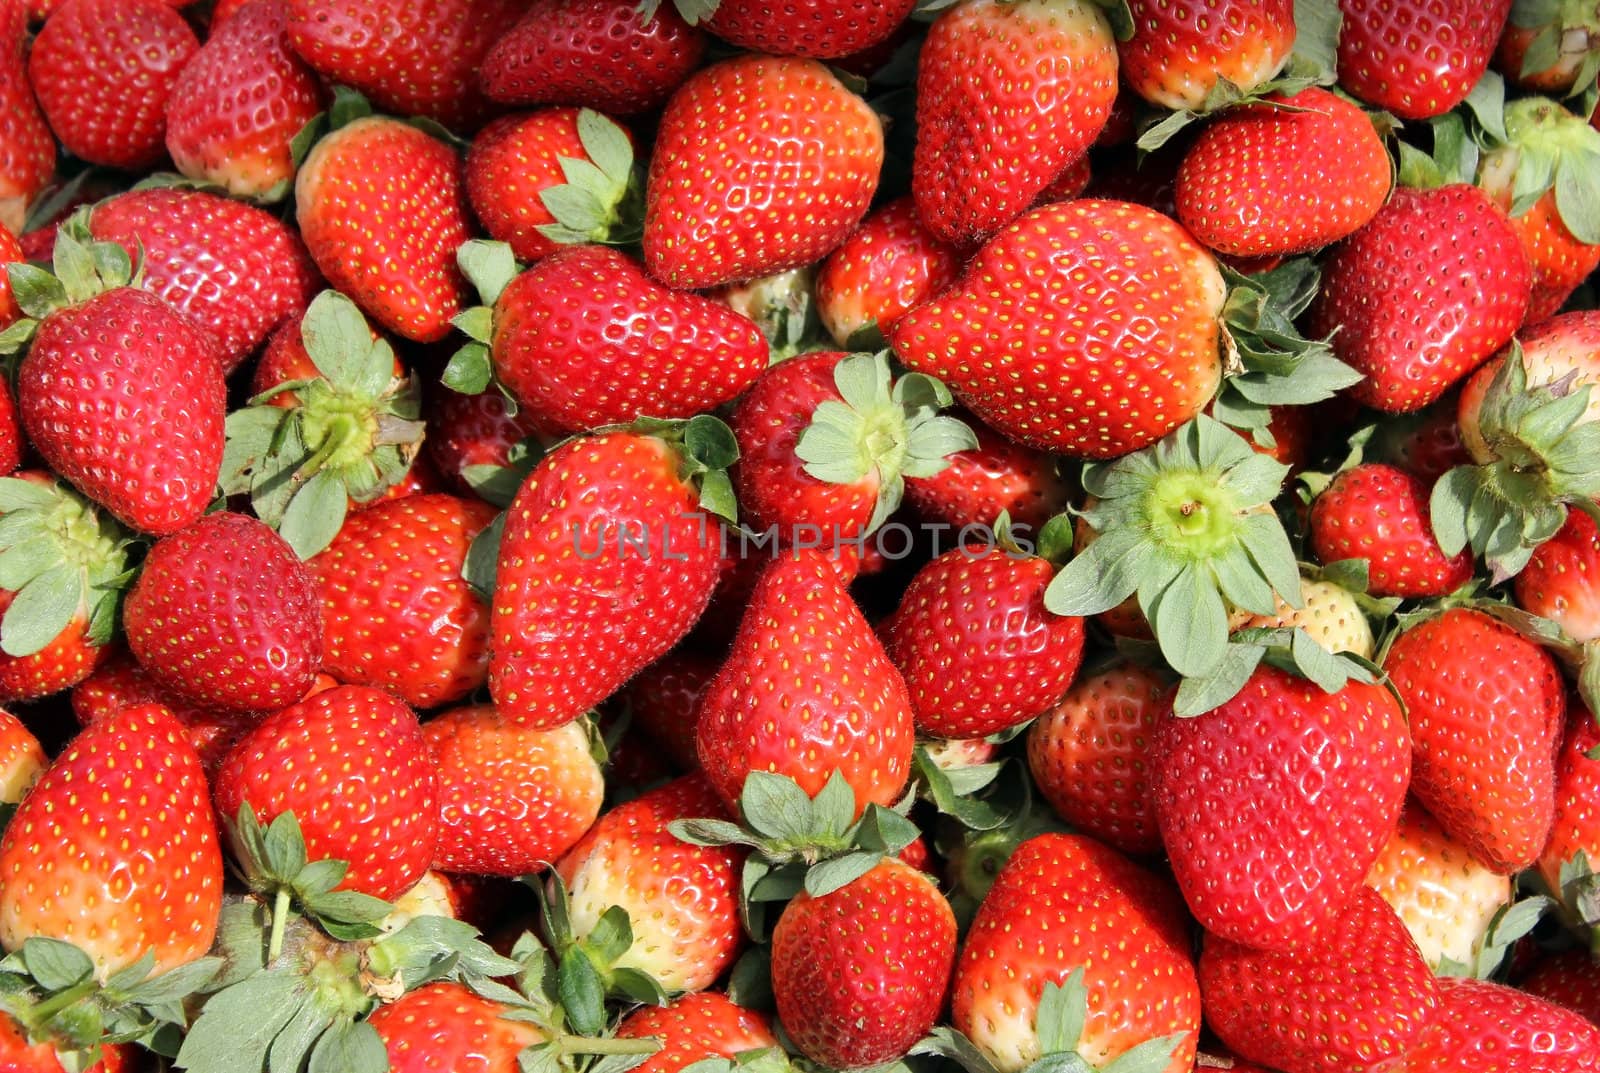 Fresh ripe of the berries of strawberry as food and agricultural backgrounds